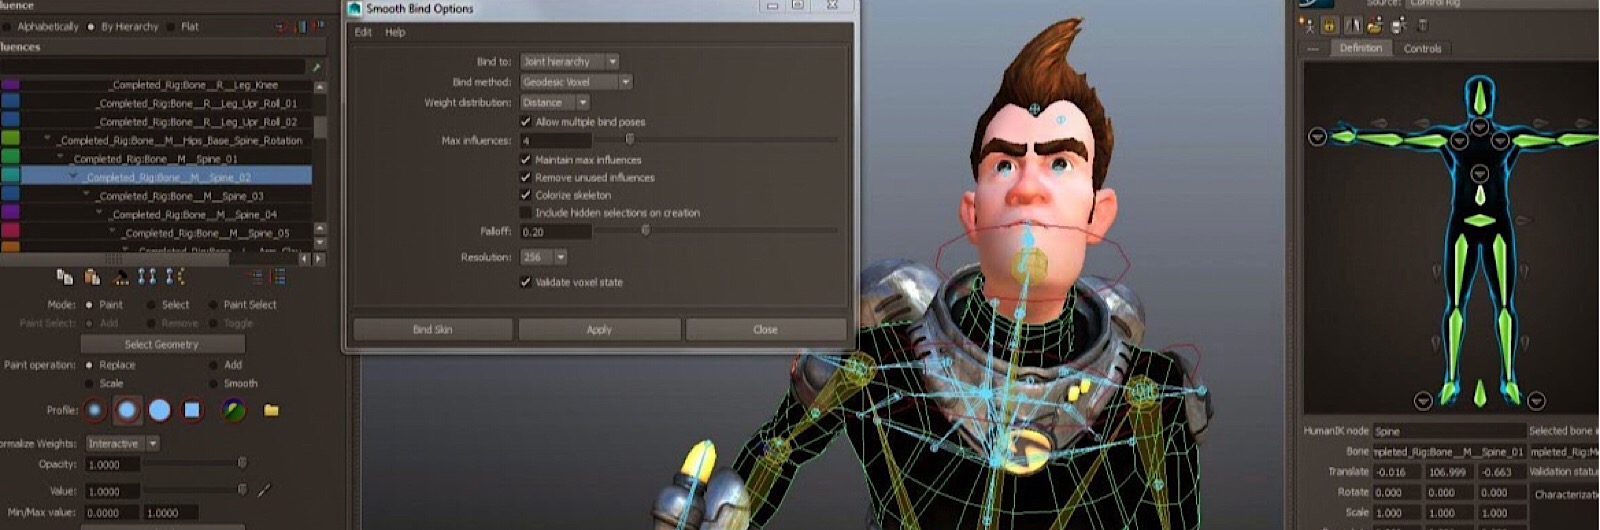 7 Best Essential Animation Design and Development Software for Beginners  and Professionals | University of Silicon Valley